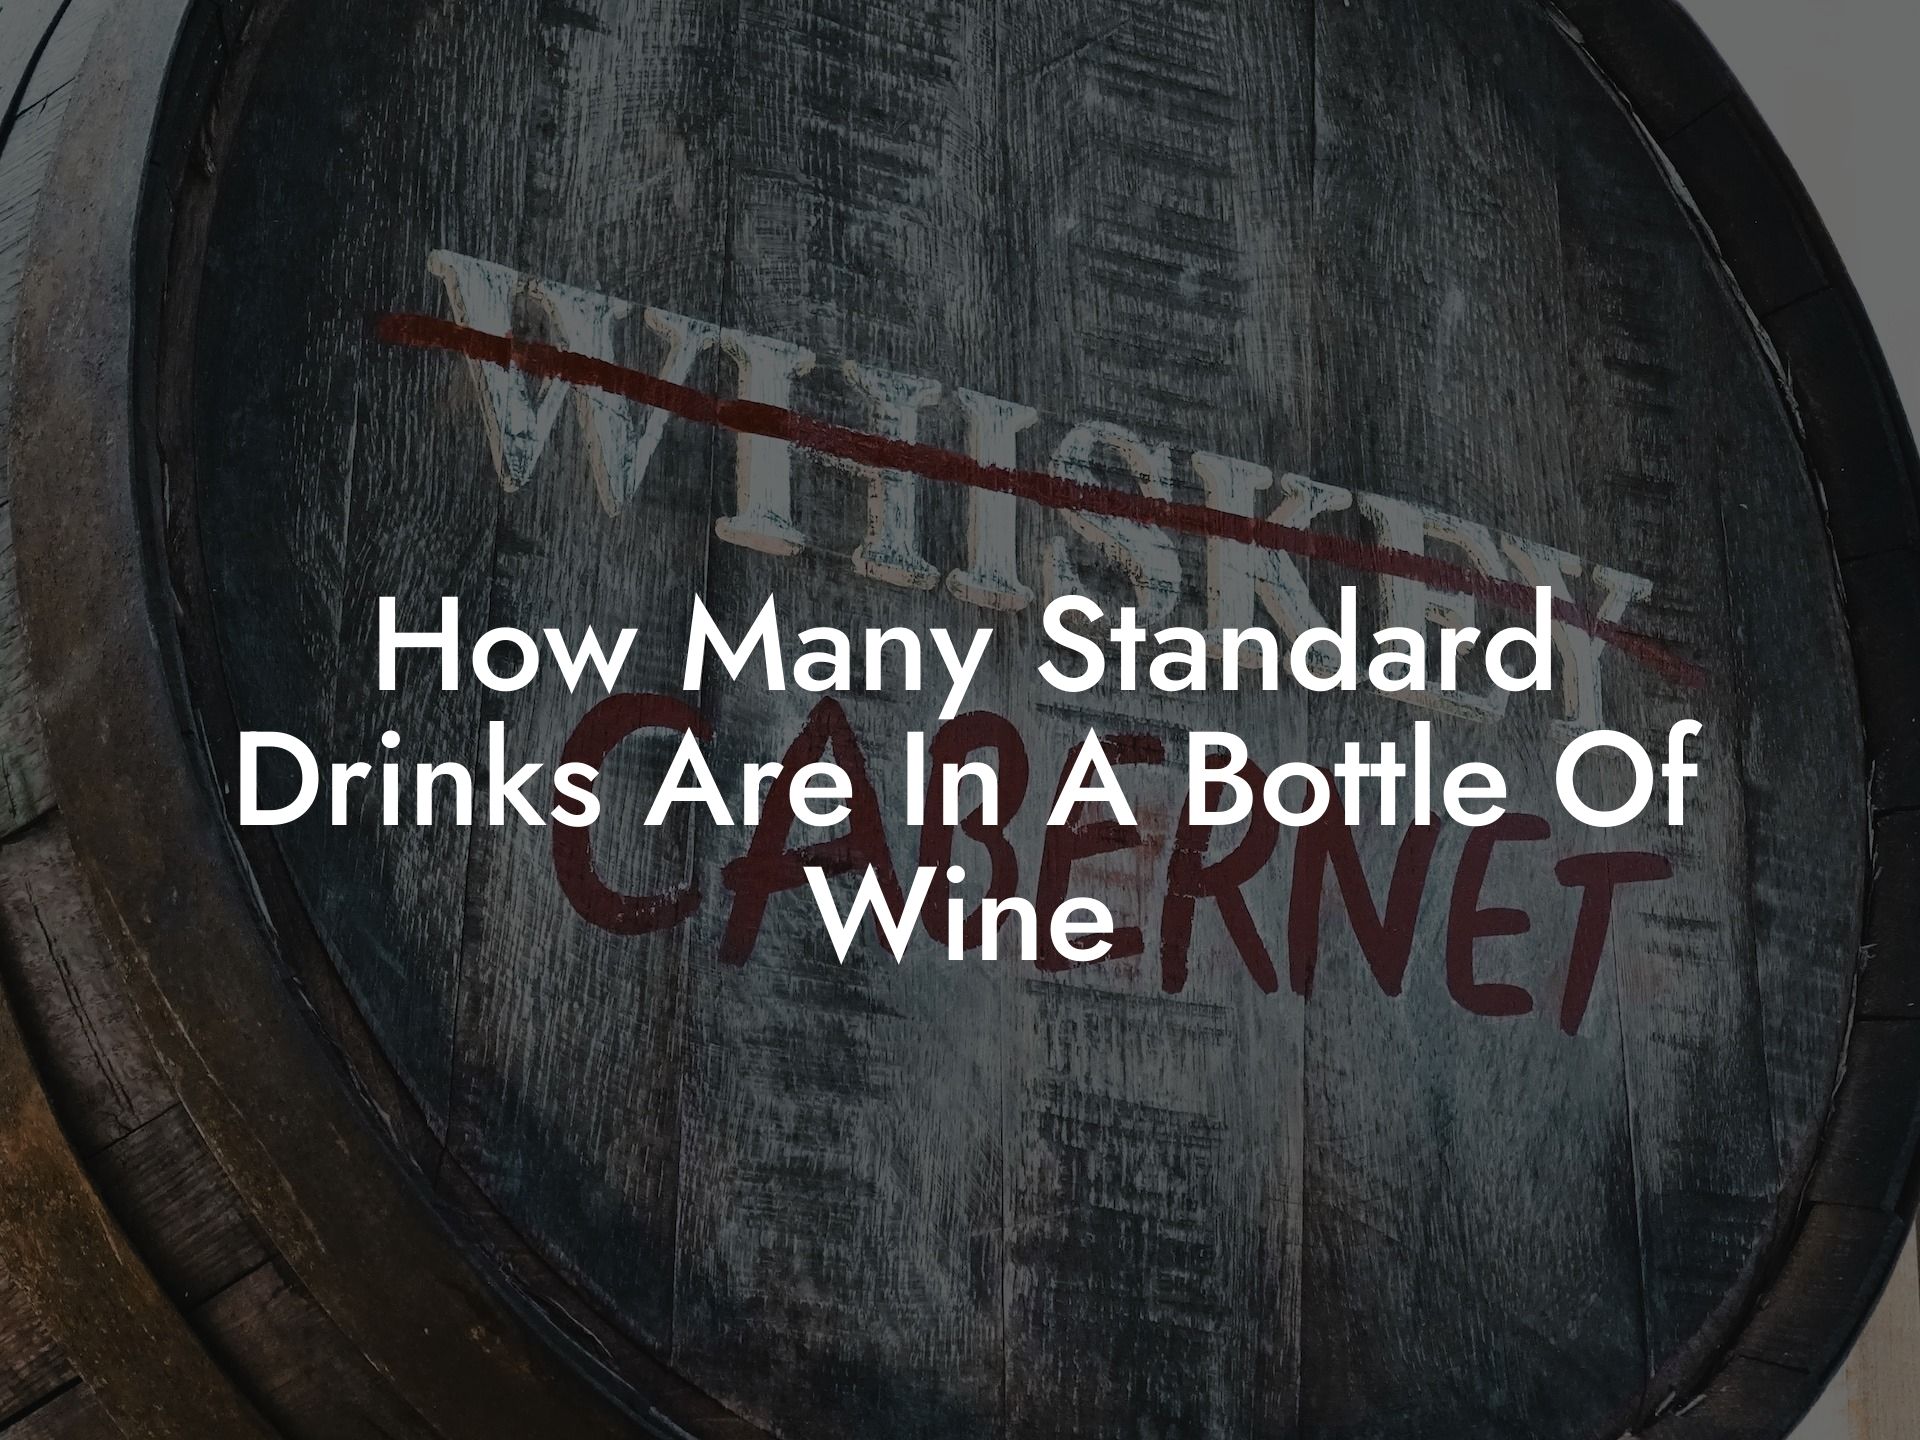 How Many Standard Drinks Are In A Bottle Of Wine